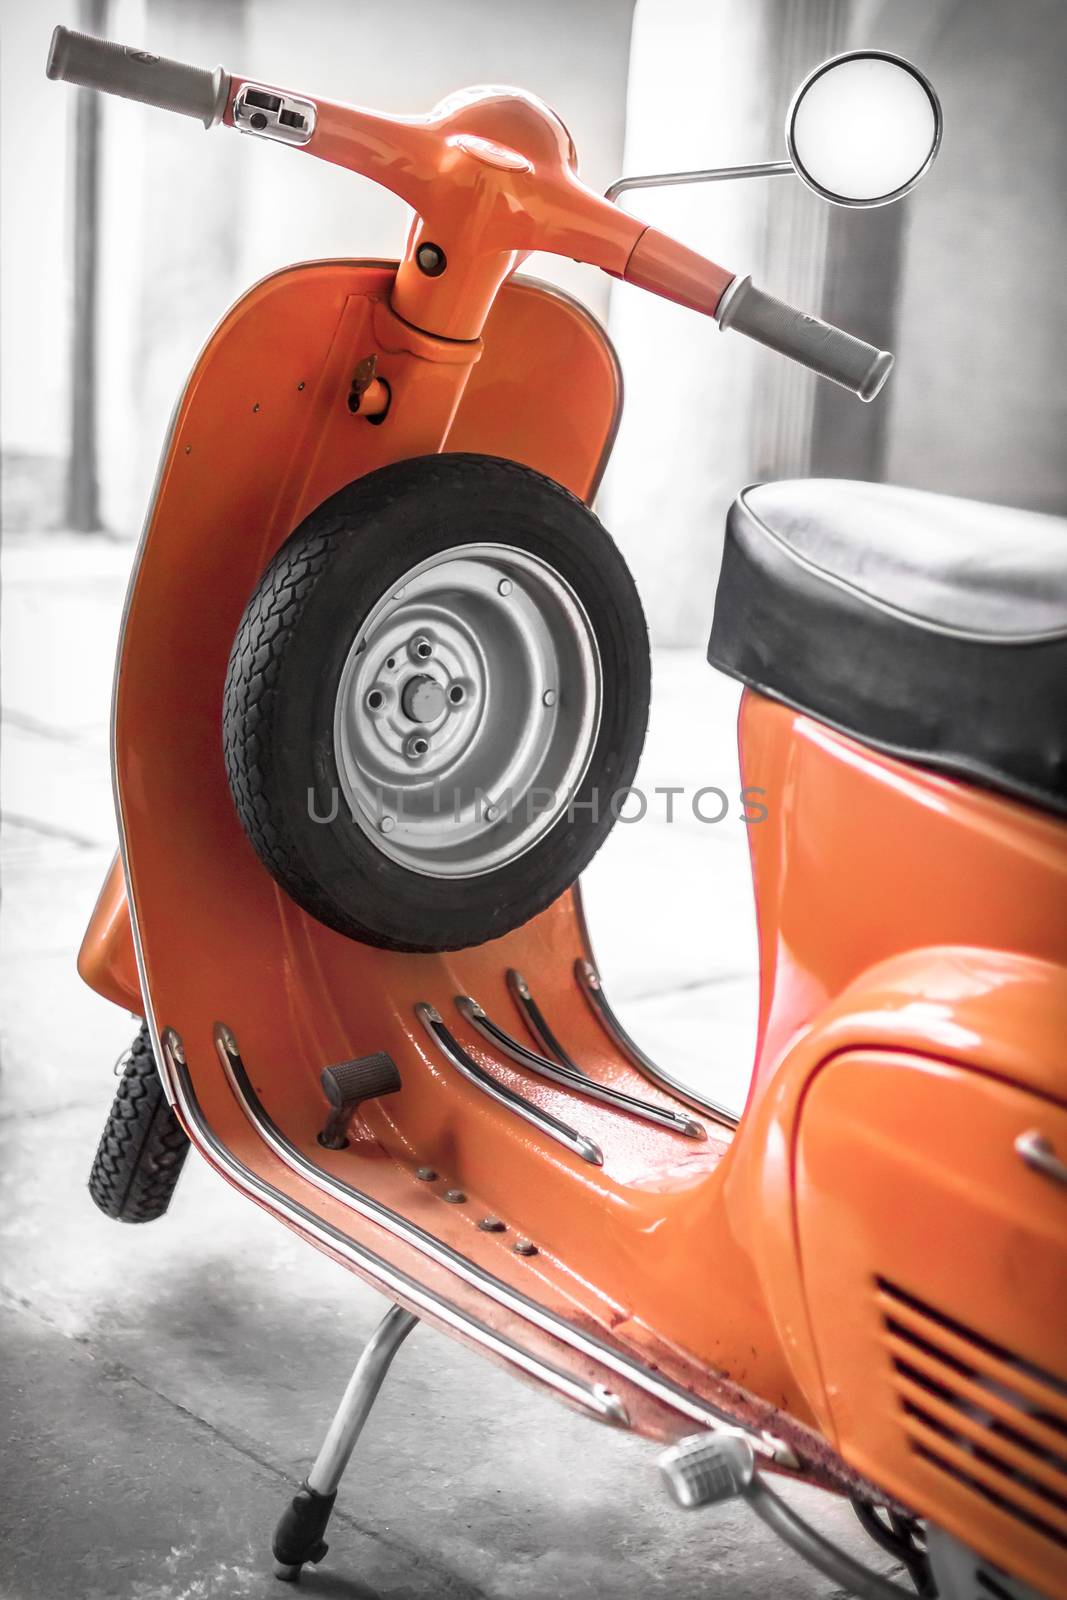 Vintage scooter parked in the garage